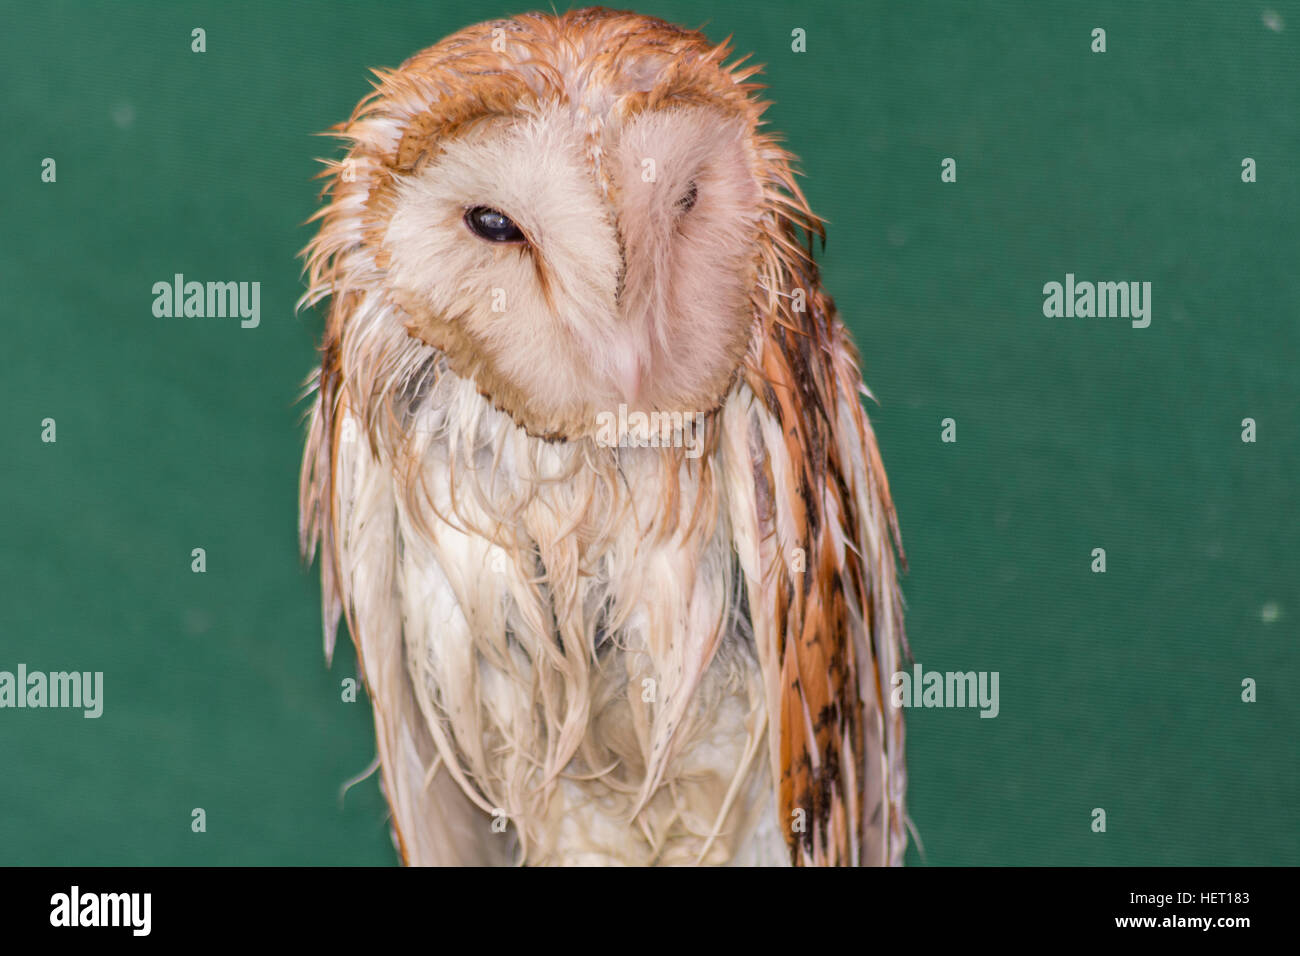 Bleary-eyed owl Stock Photo